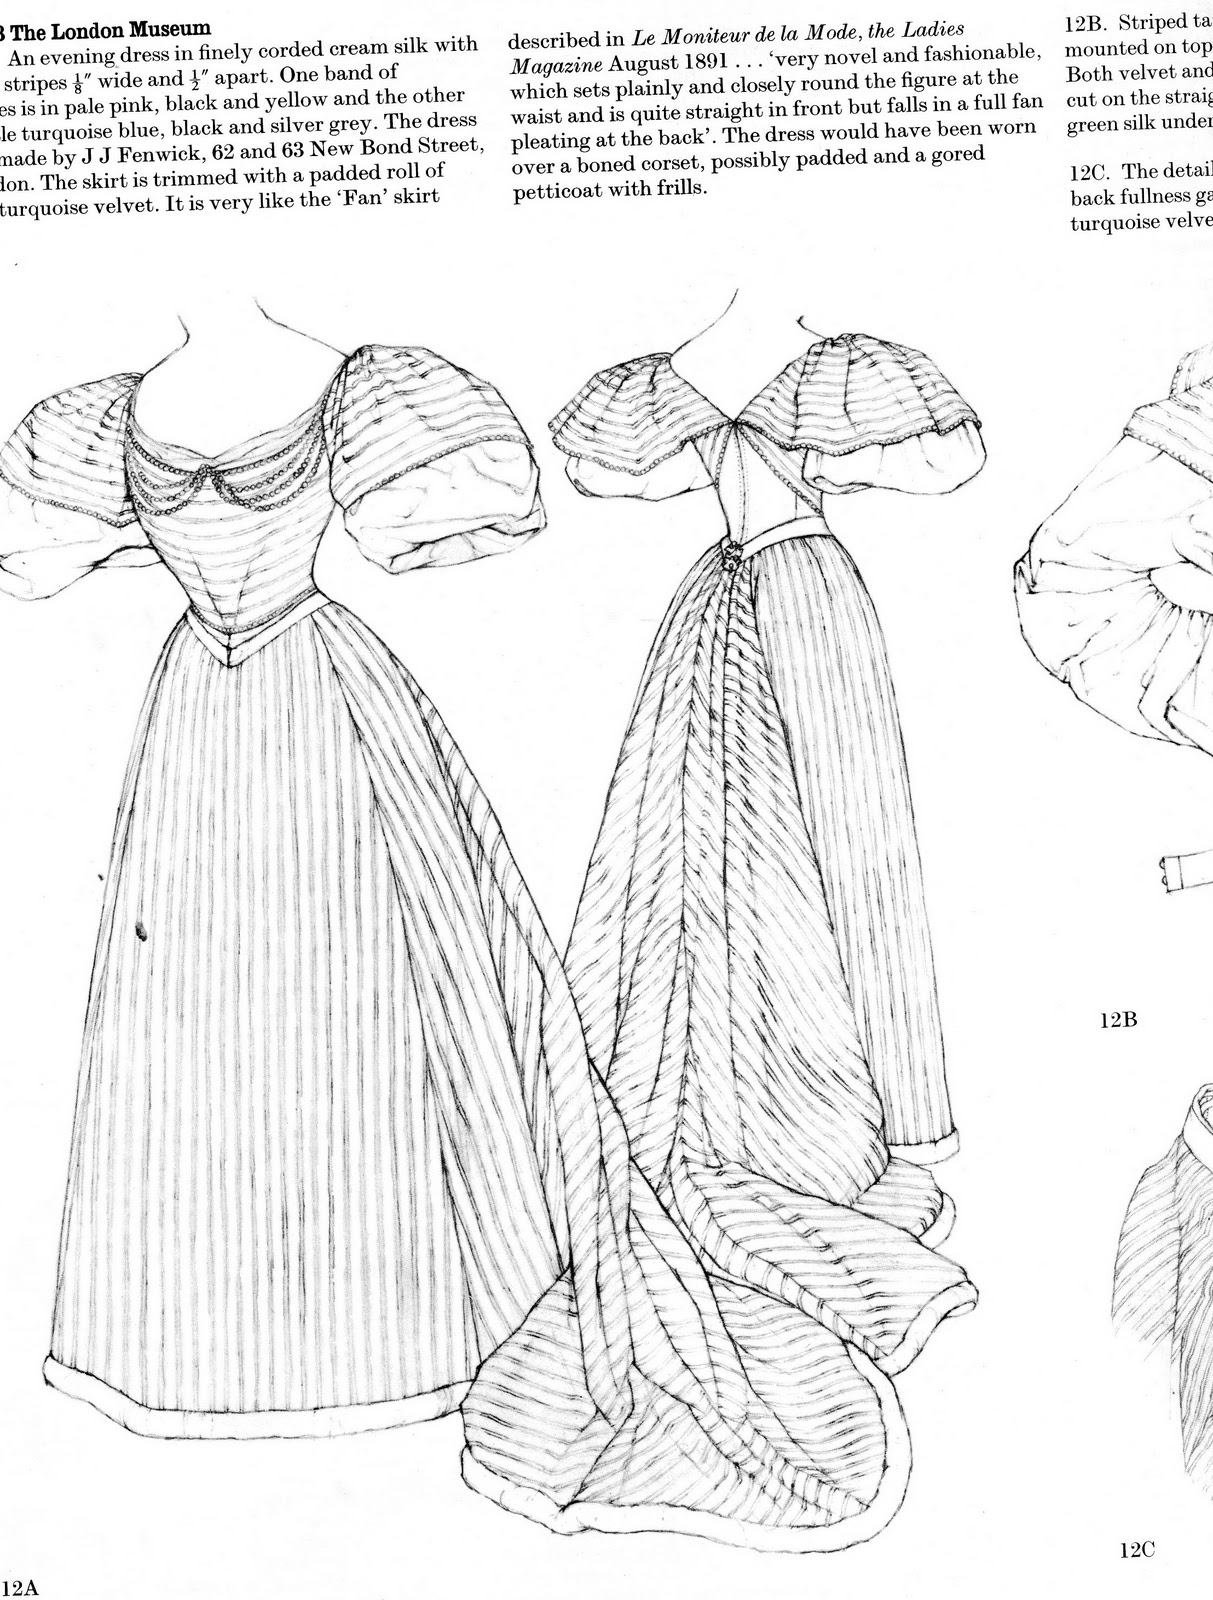 Emily Hudson - Costume Construction: Research - Patterns